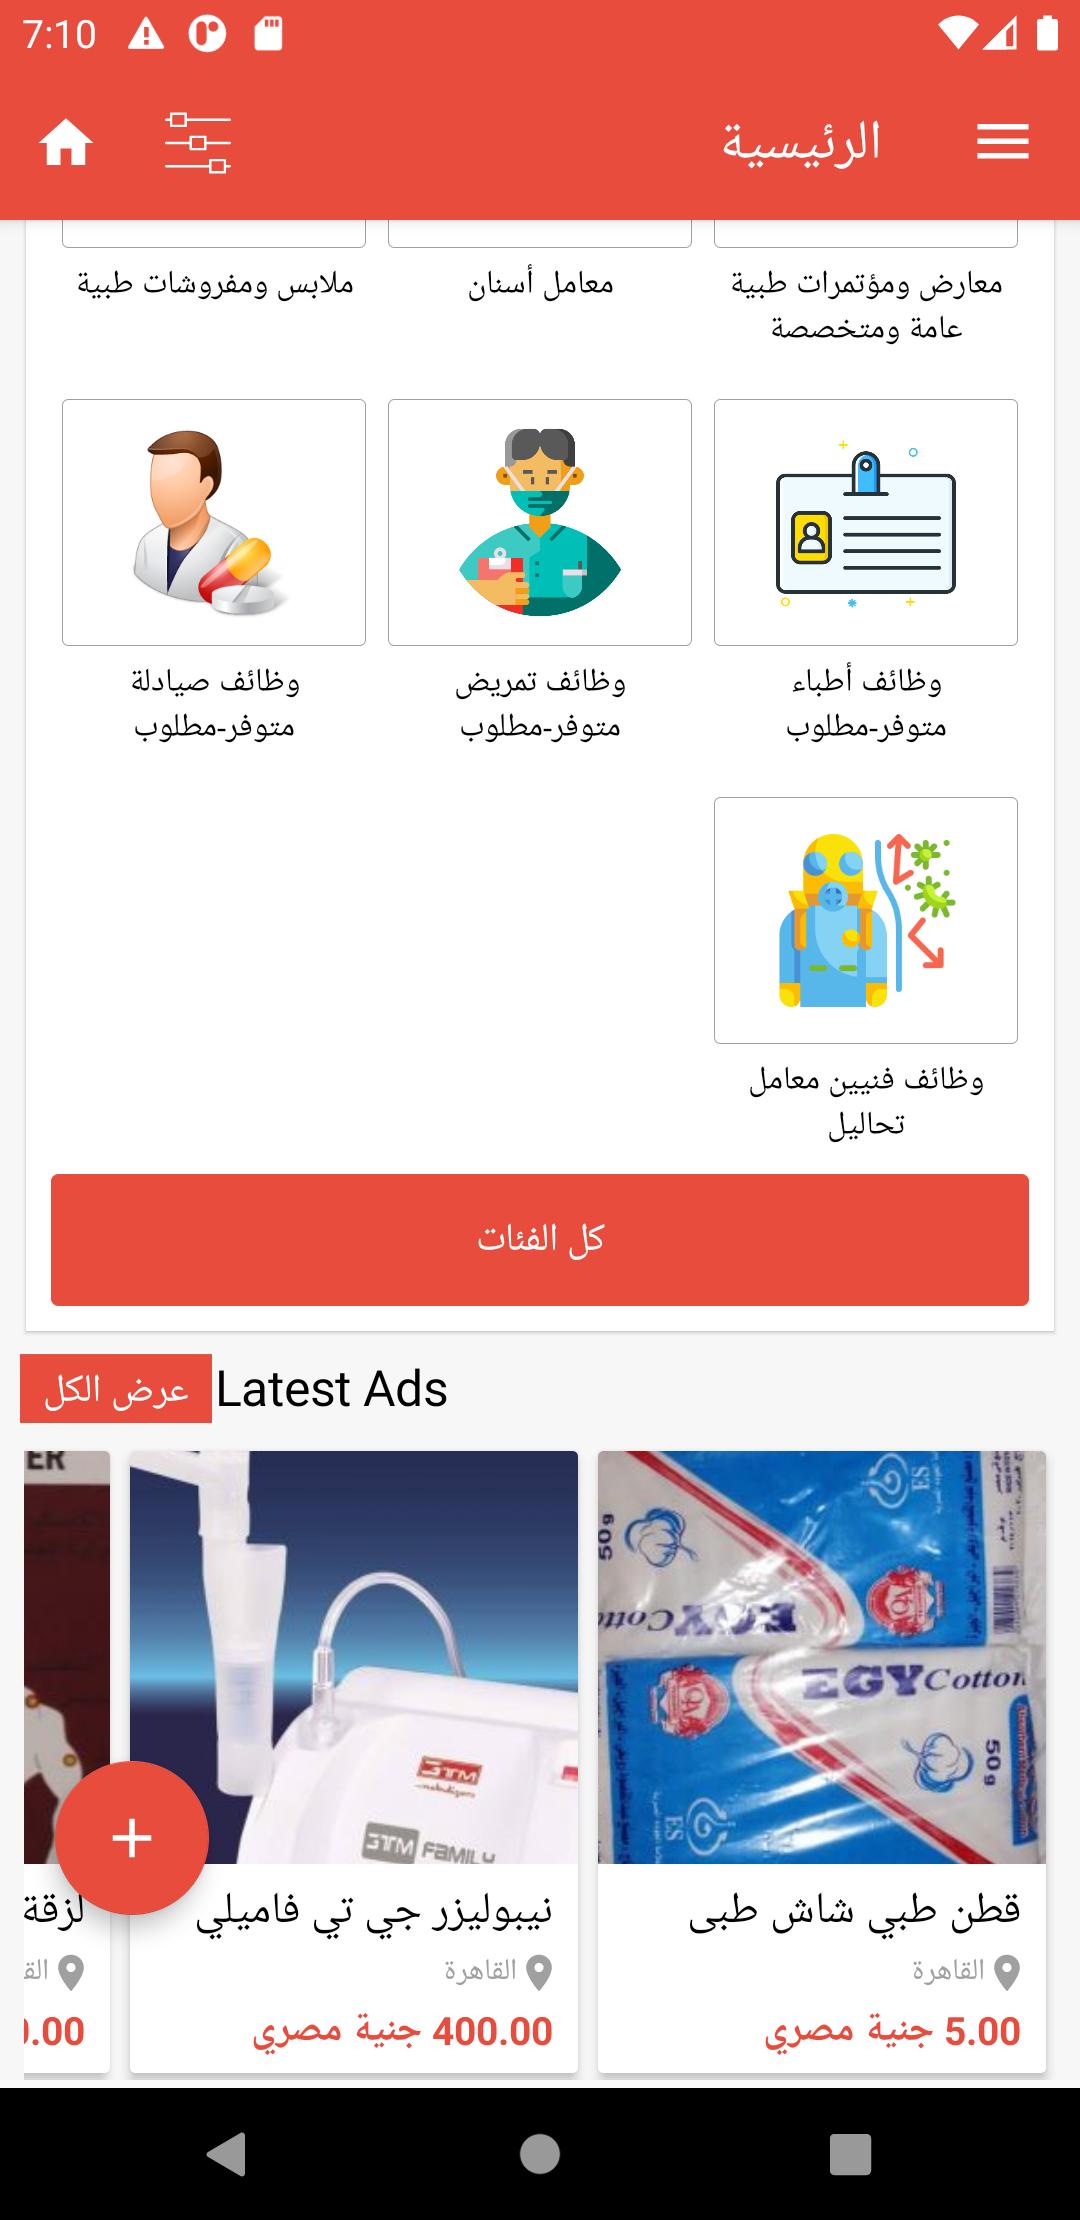 Teb Misr - طب مصر for Android - APK Download